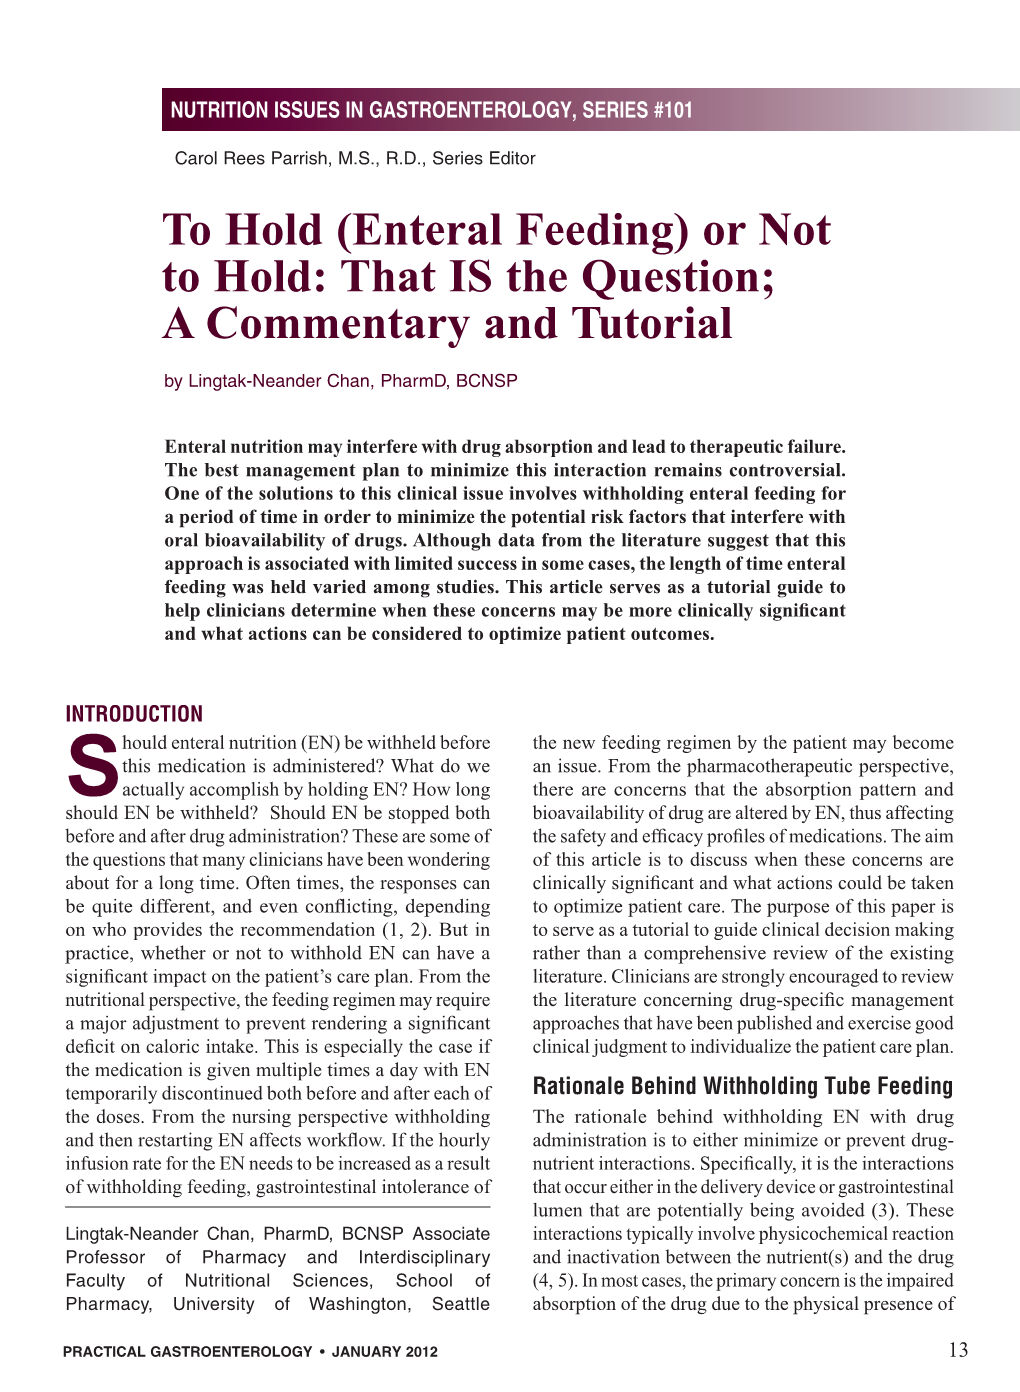 To Hold (Enteral Feeding) Or Not to Hold: That IS the Question; a Commentary and Tutorial